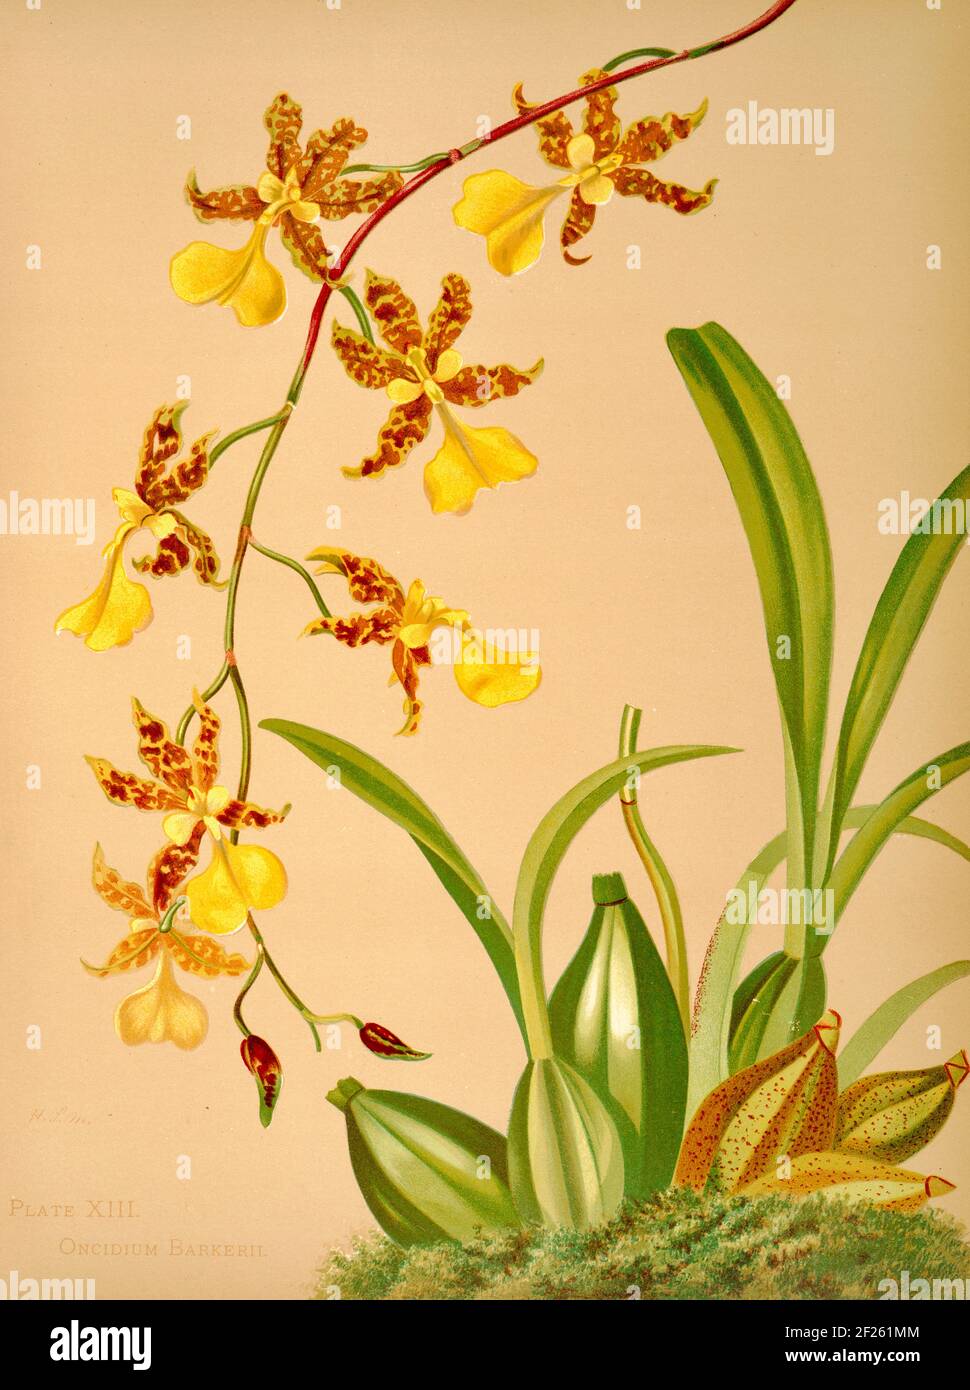 Harriet Stewart Miner's botanical vintage illustration from Orchids - The Royal Family of Plants from 1885 - Oncidium barkerii Stock Photo